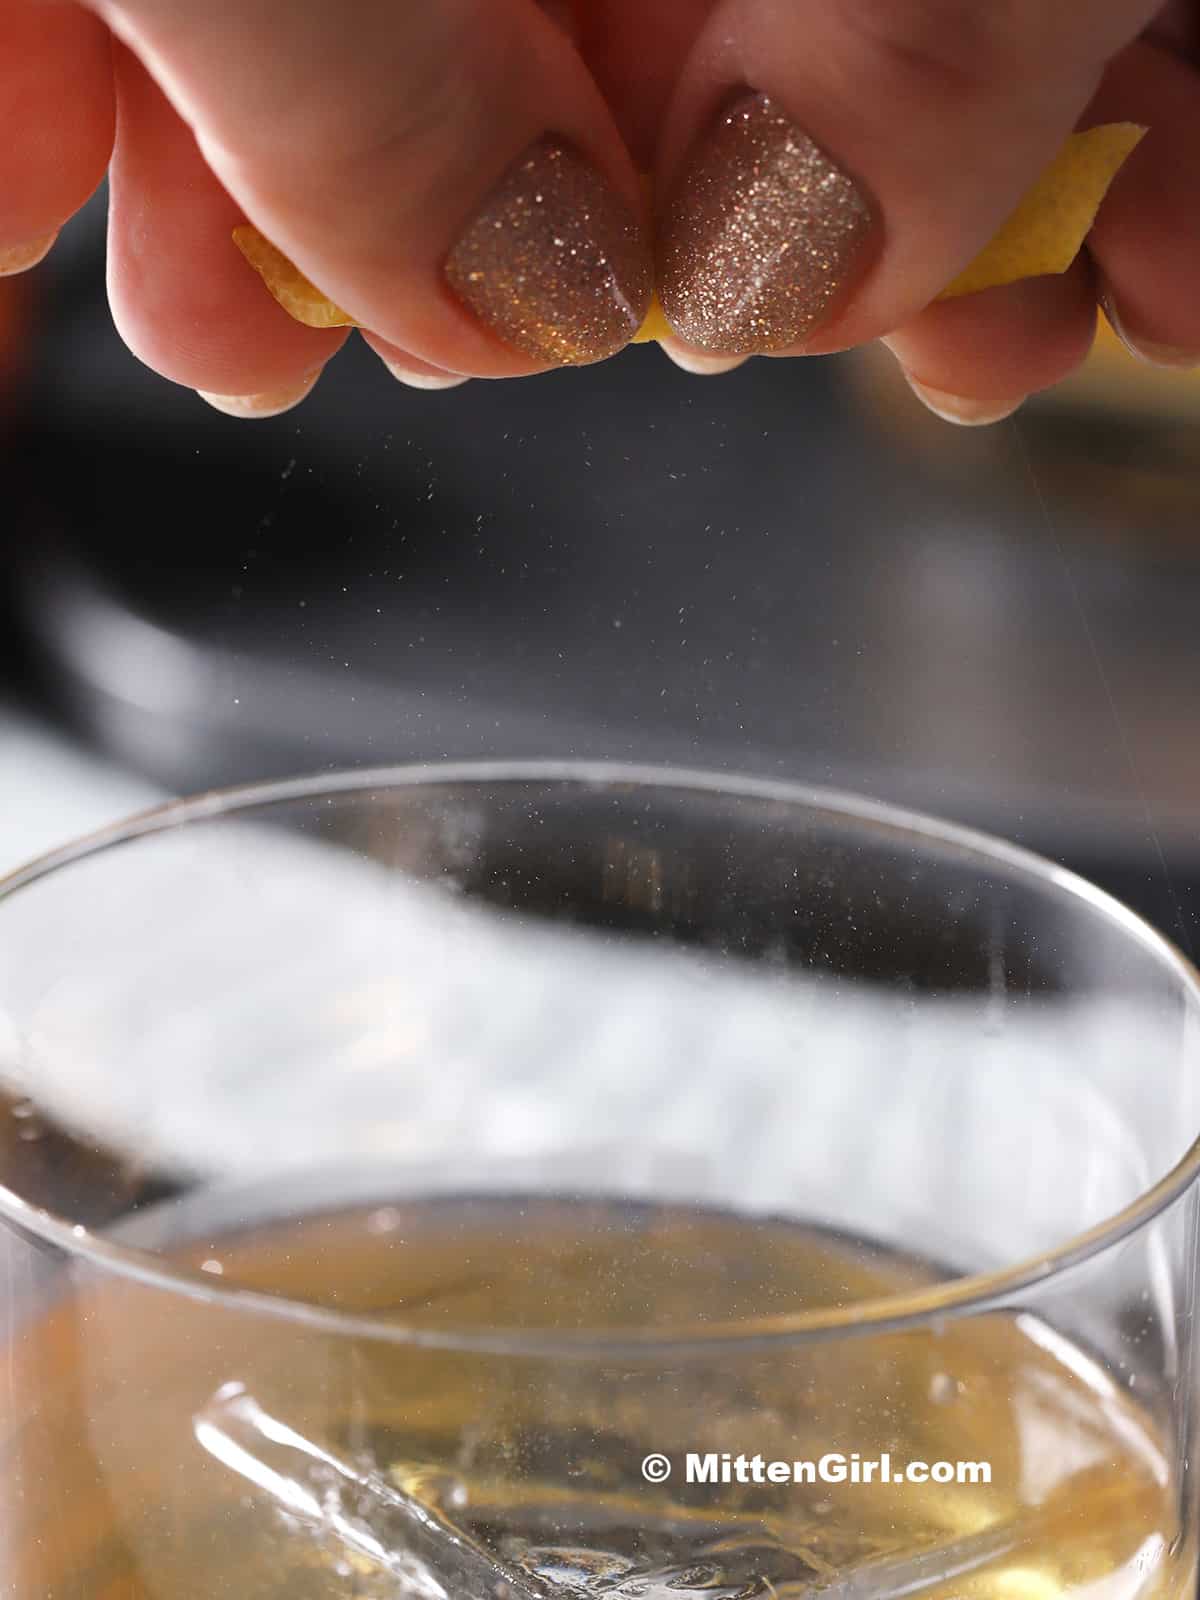 A hand squeezing a lemon peel over a glass of cocktail. 